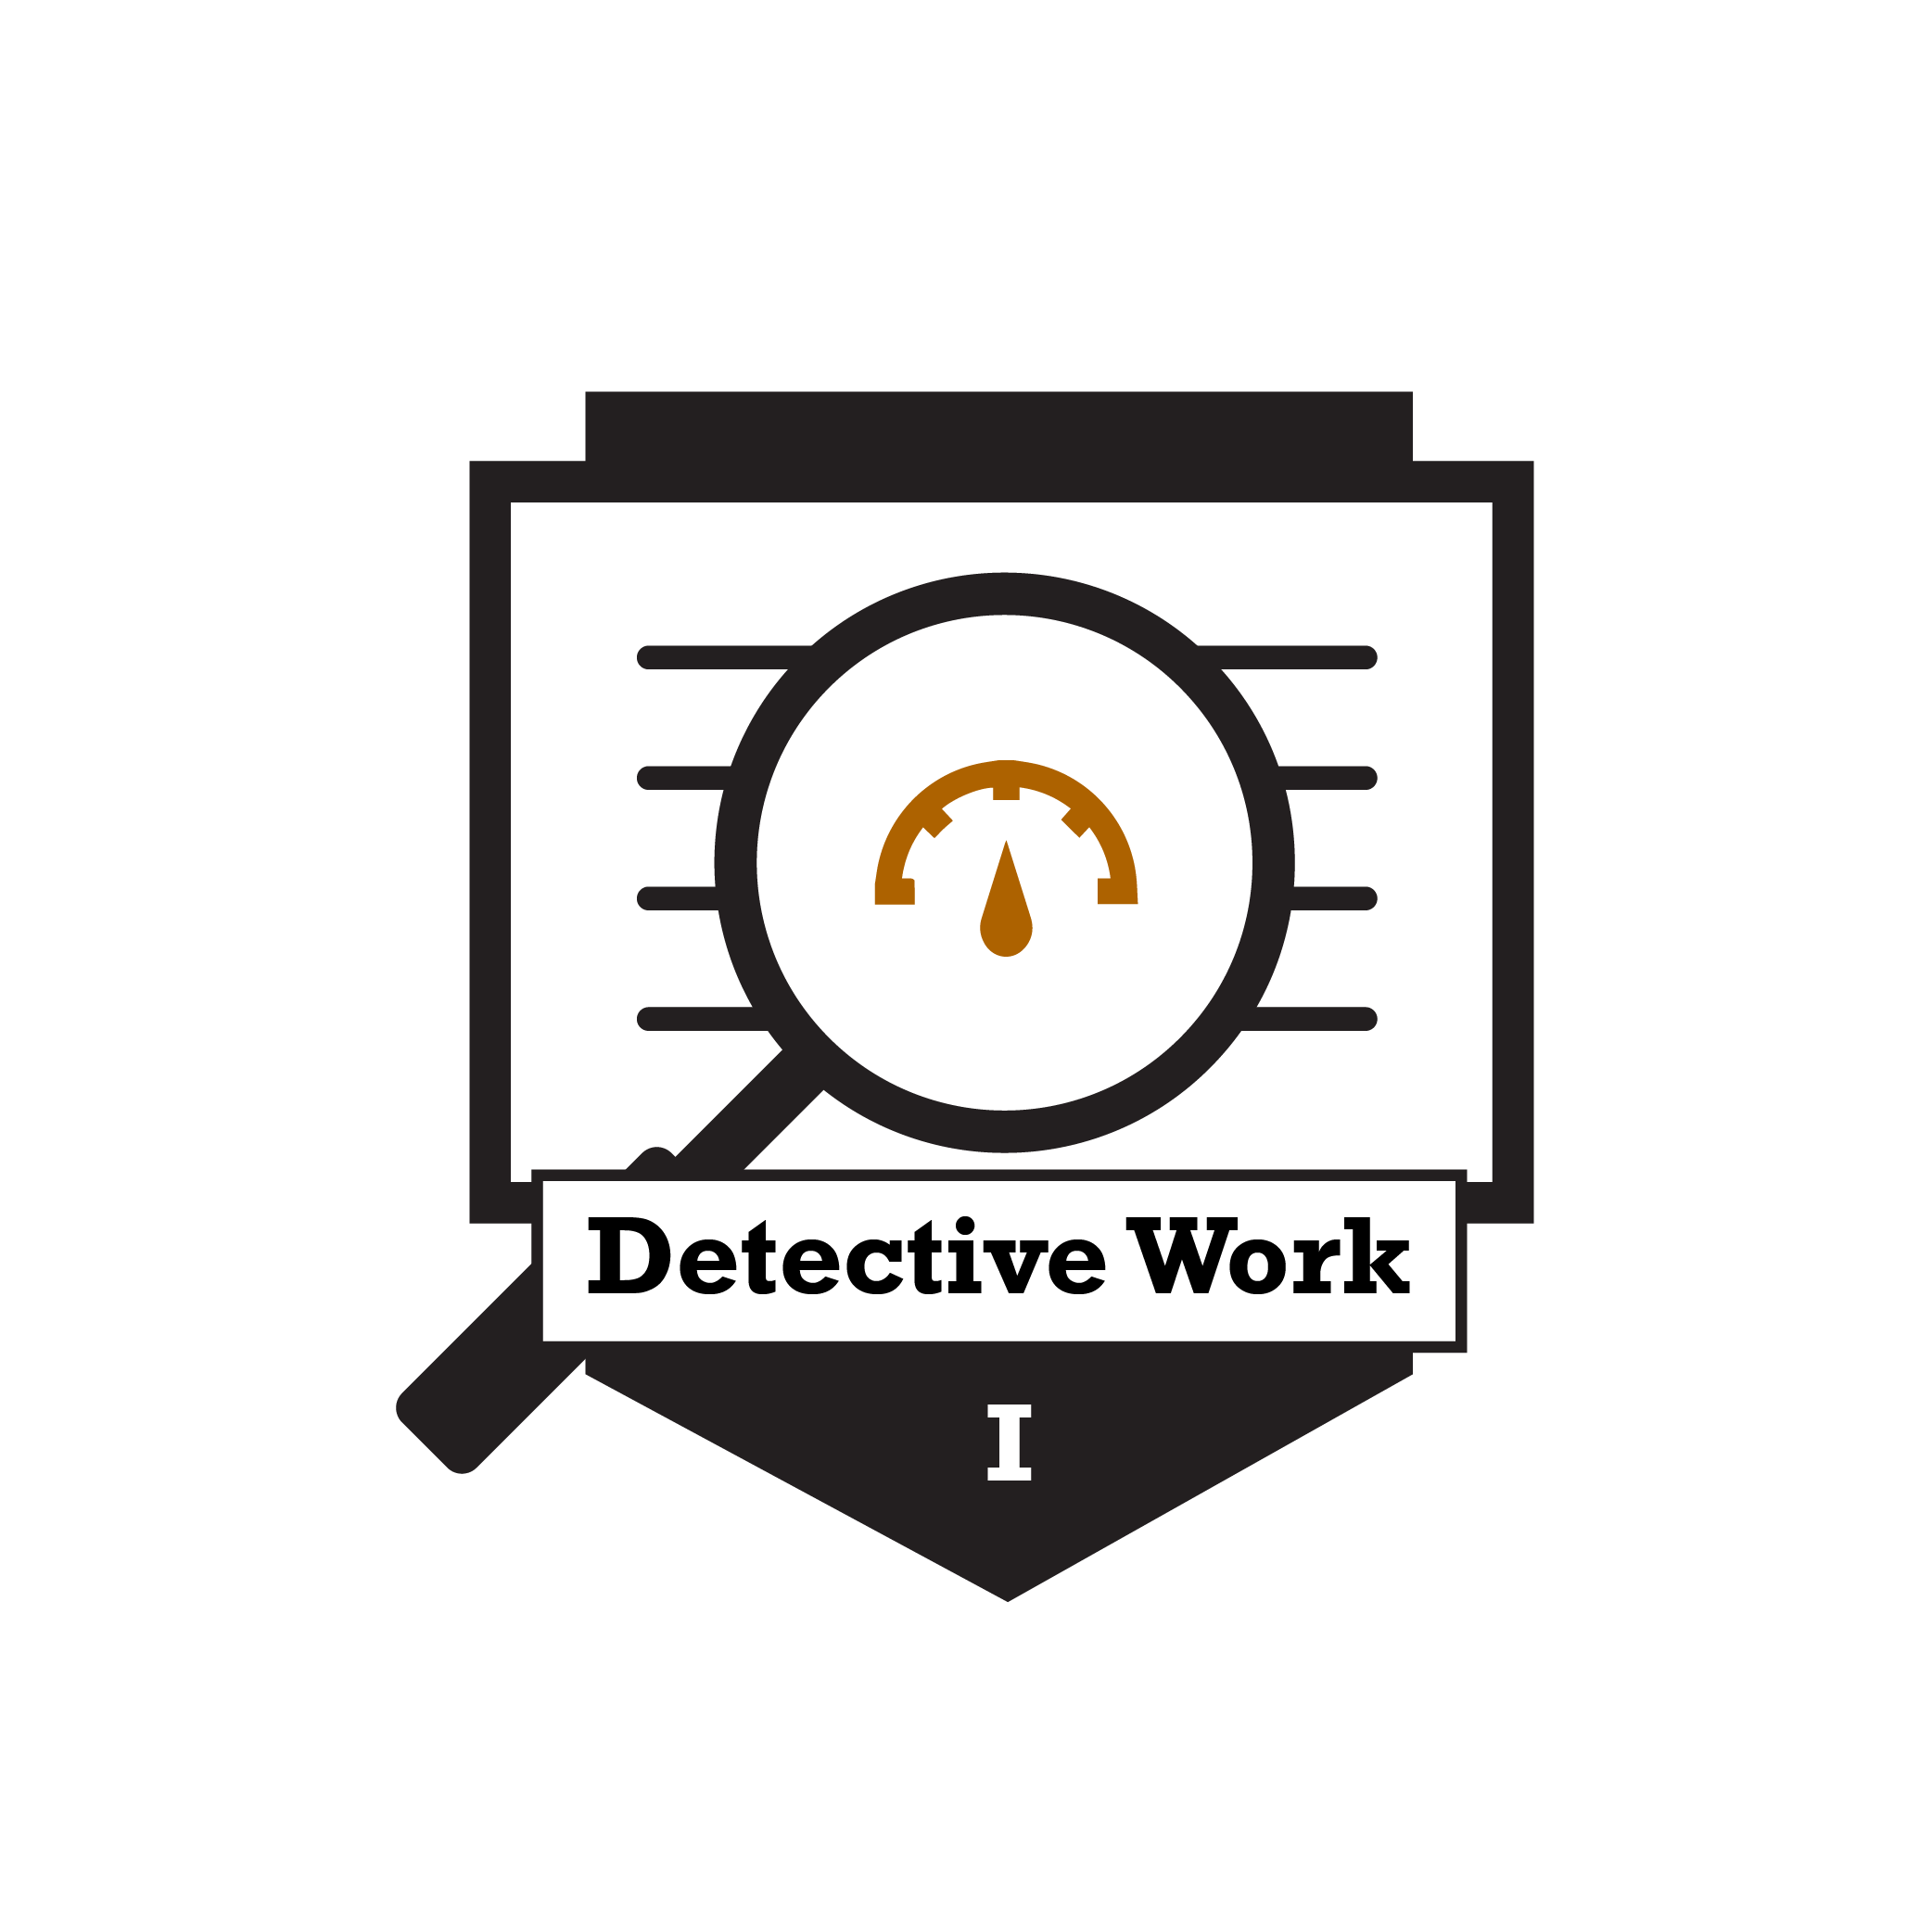 detective work badge has a magnifying glass focusing on an accessibility score indicator